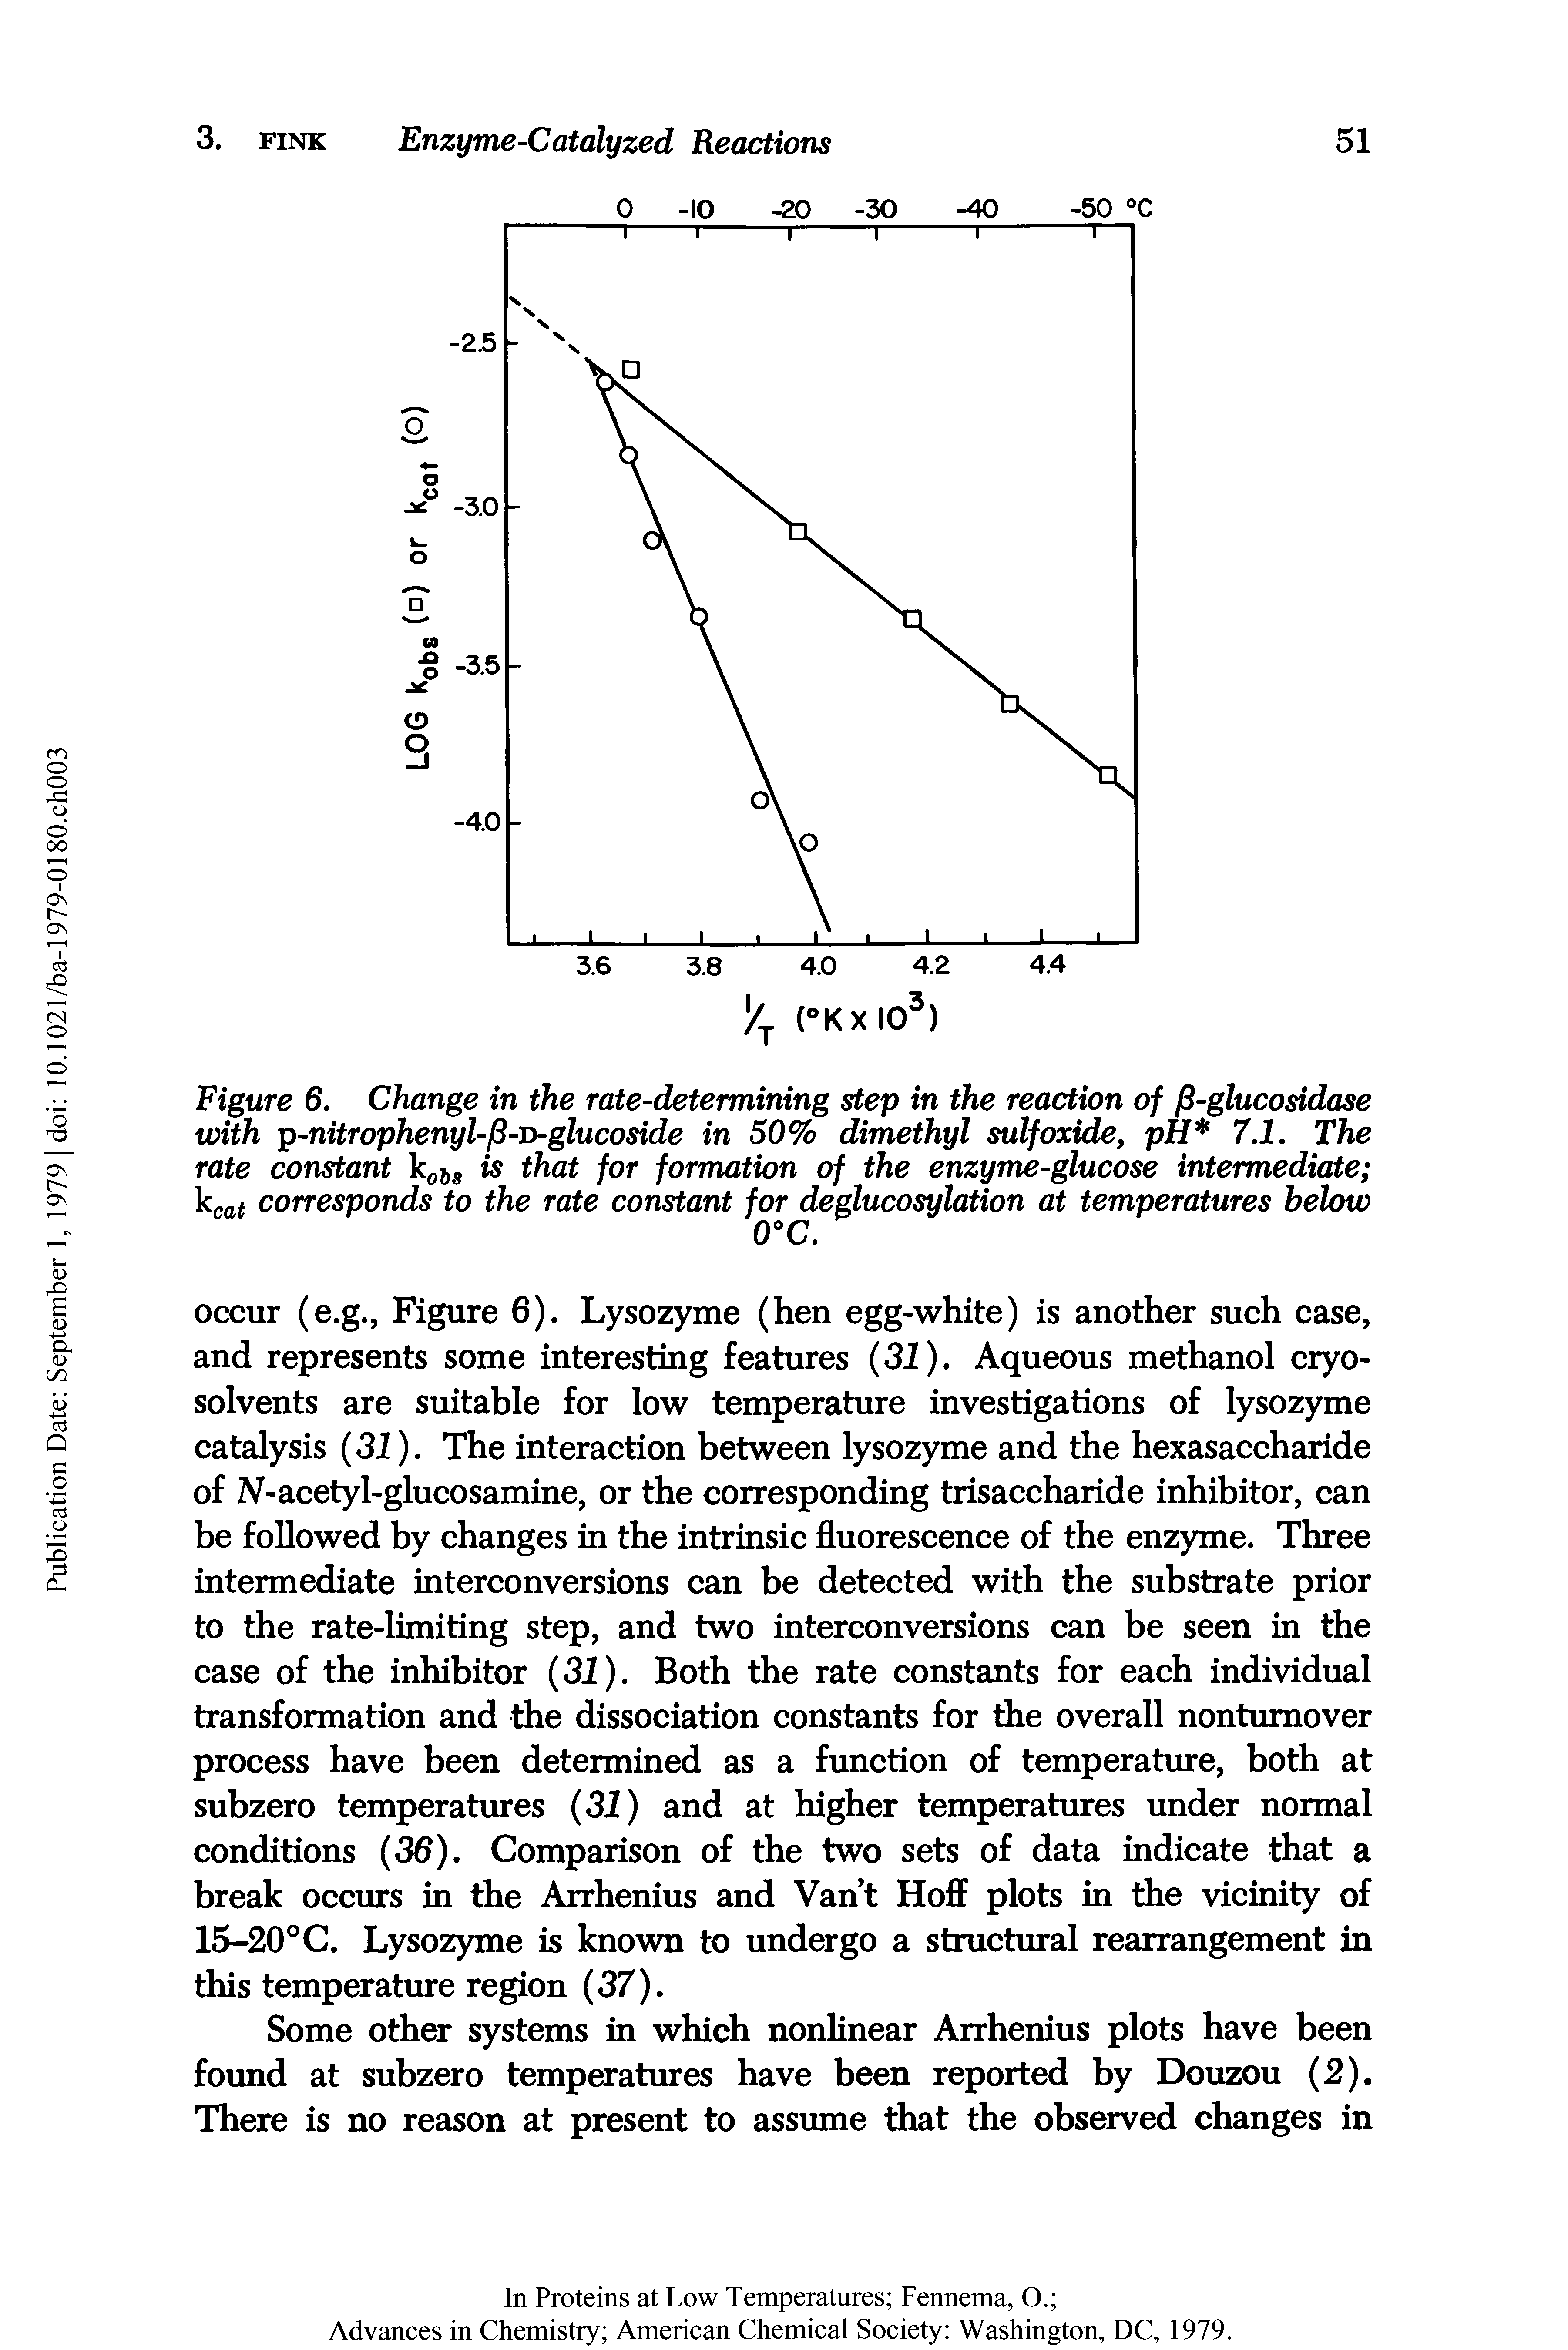 Figure 6. Change in the rate-determining step in the reaction of fi-glucosidase with p-nitrophenyl-fi-iy-glucoside in 50% dimethyl sulfoxide, pH 7.1. The rate constant ko6s is that for formation of the enzyme-glucose intermediate kcat corresponds to the rate constant for deglucosylation at temperatures below...